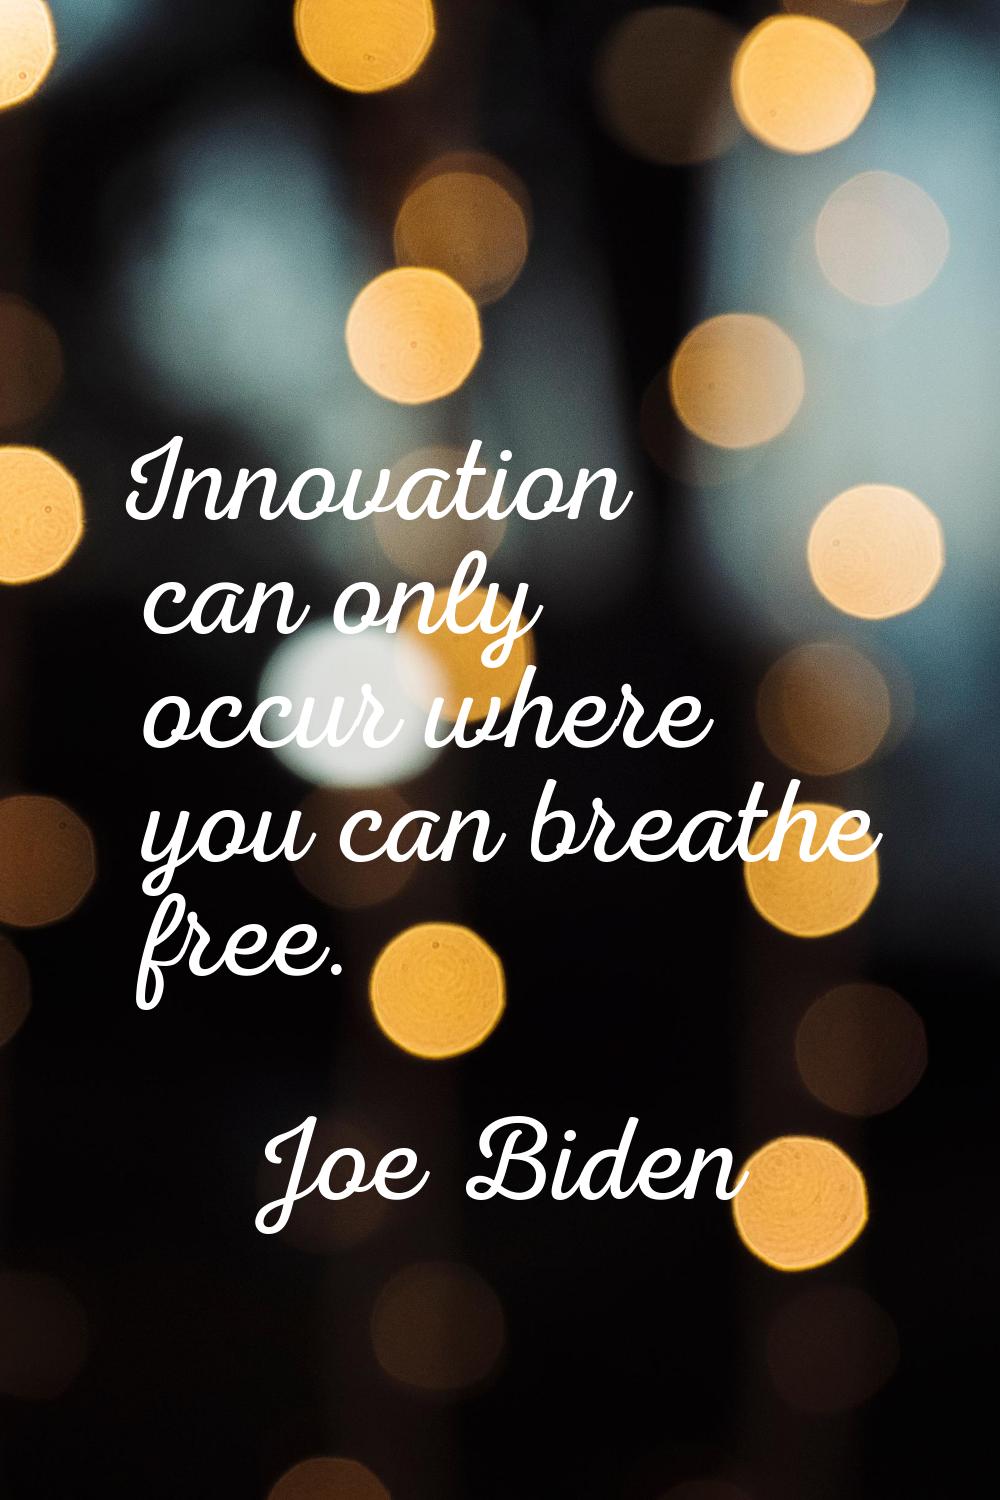 Innovation can only occur where you can breathe free.